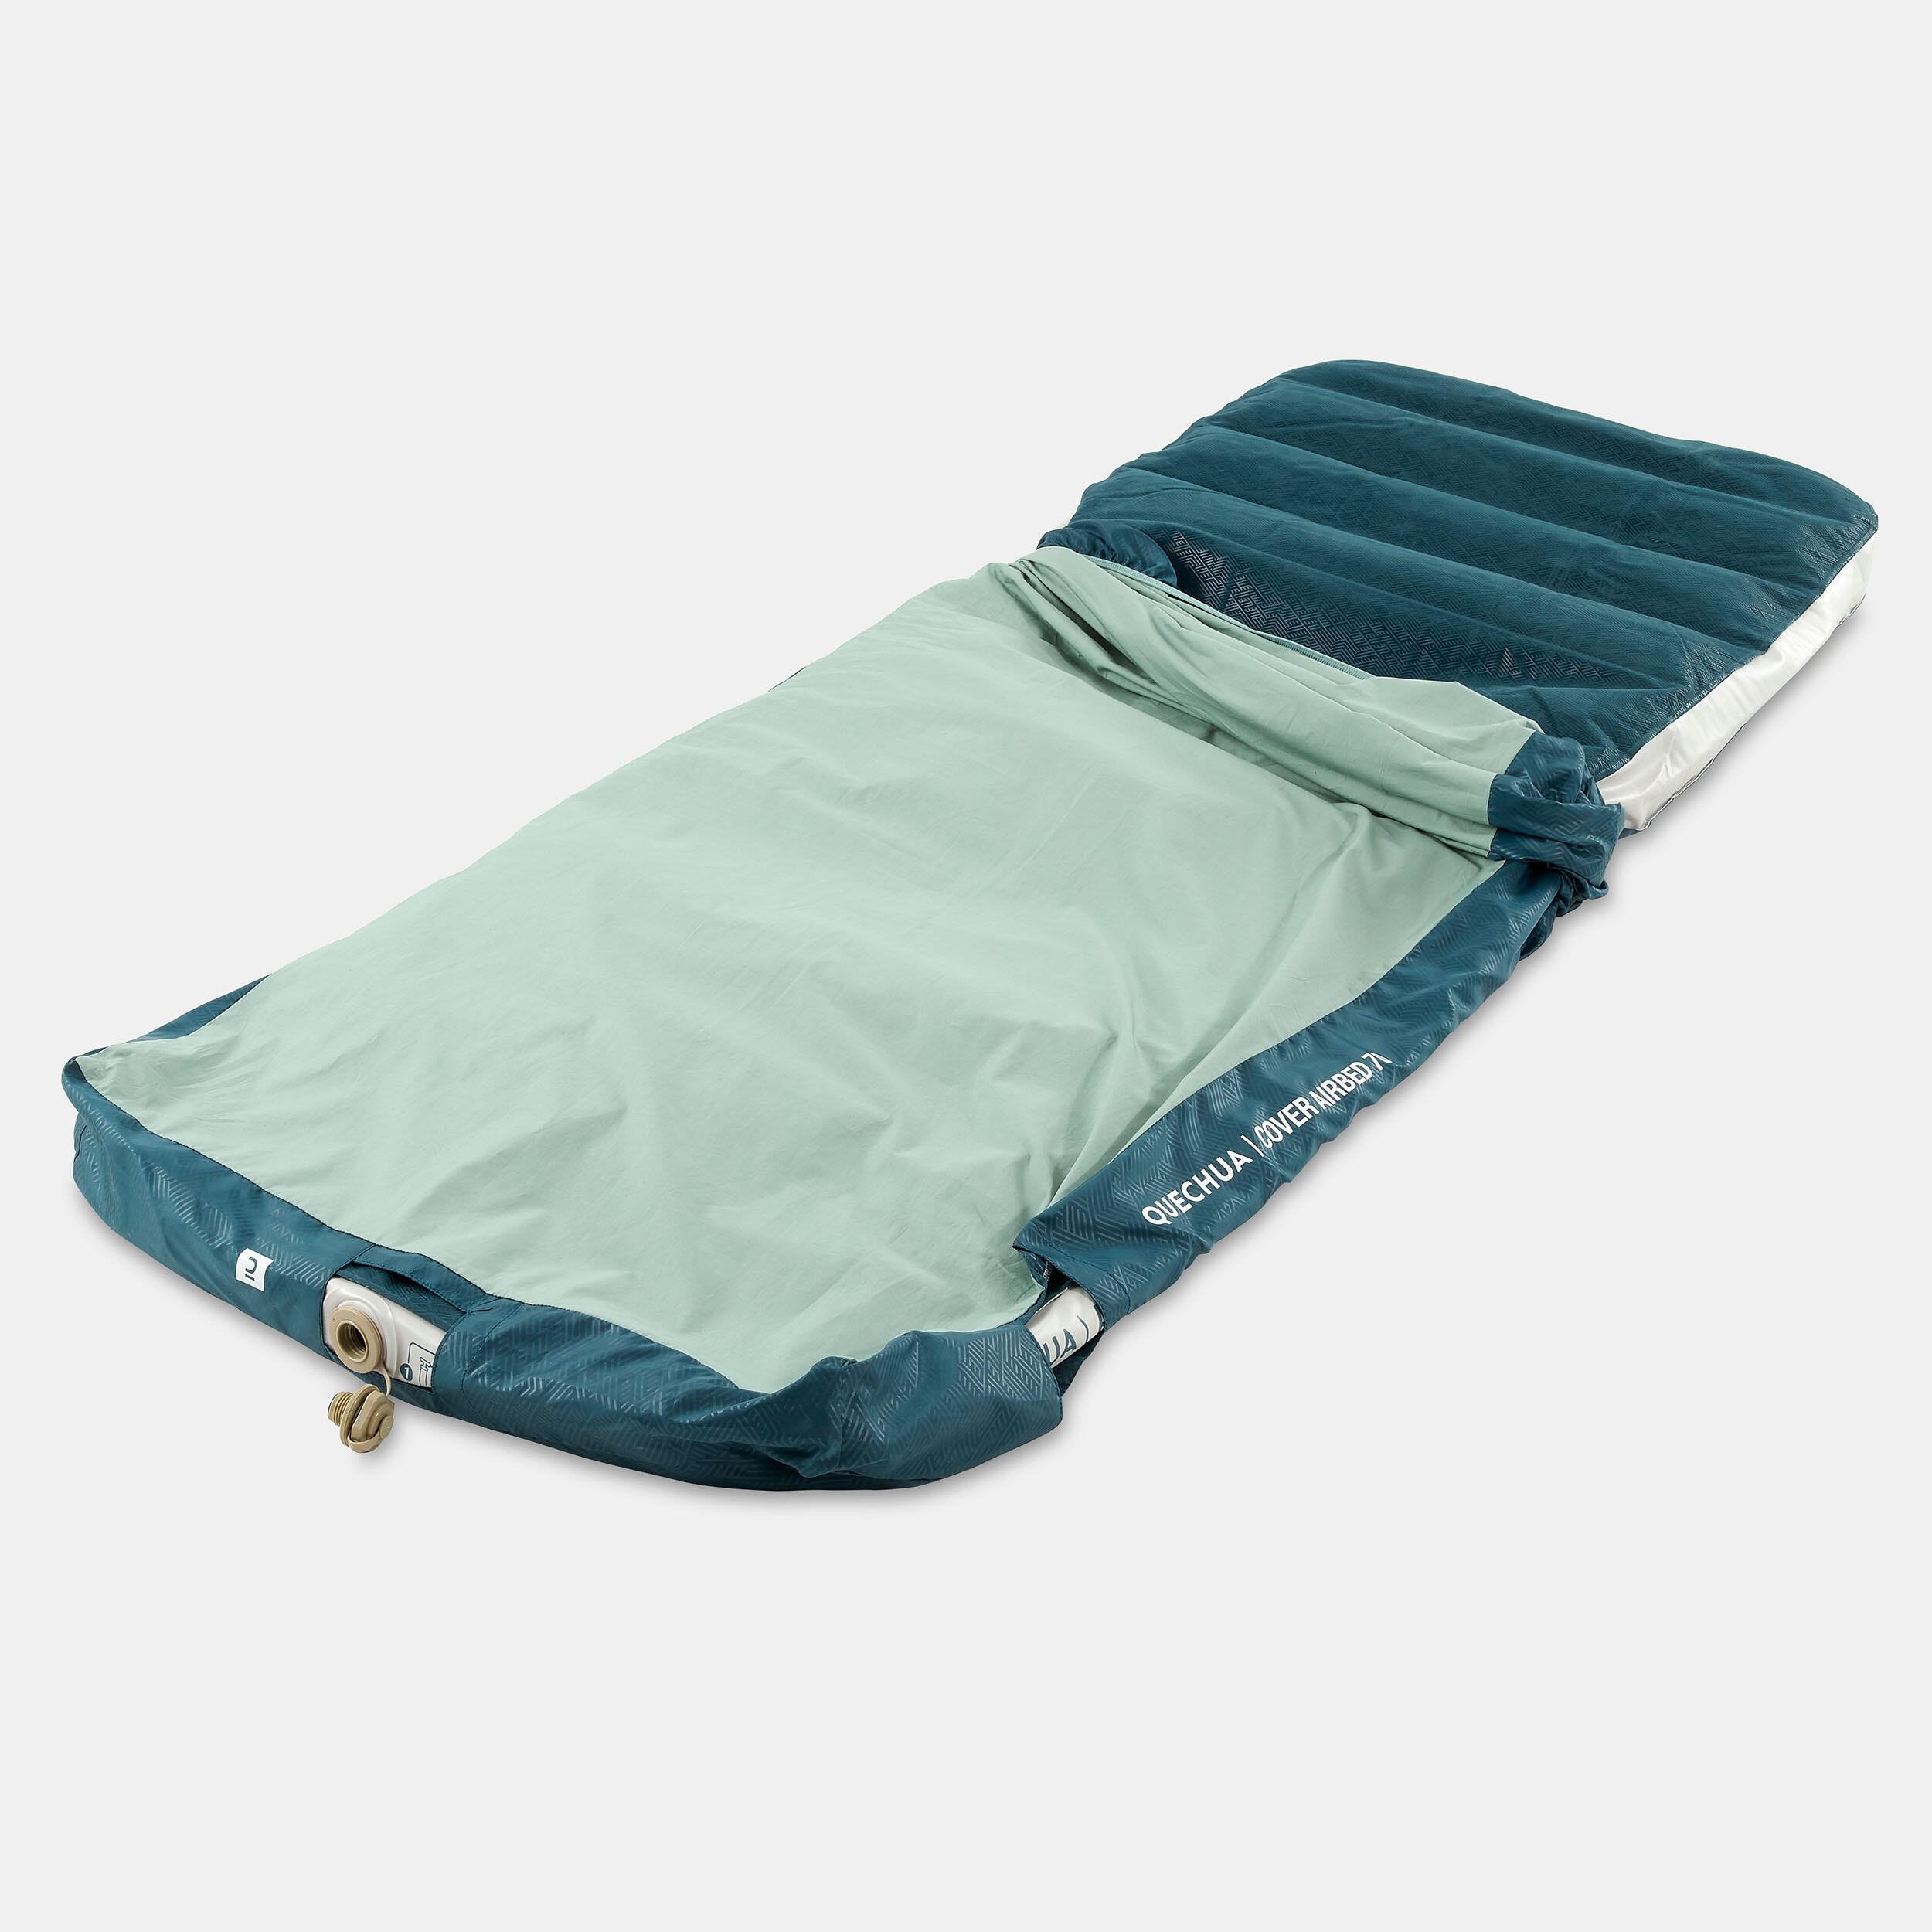 Inflatable Mattress Cover -  Airbed Cover 70 cm - 1 Person 4/5